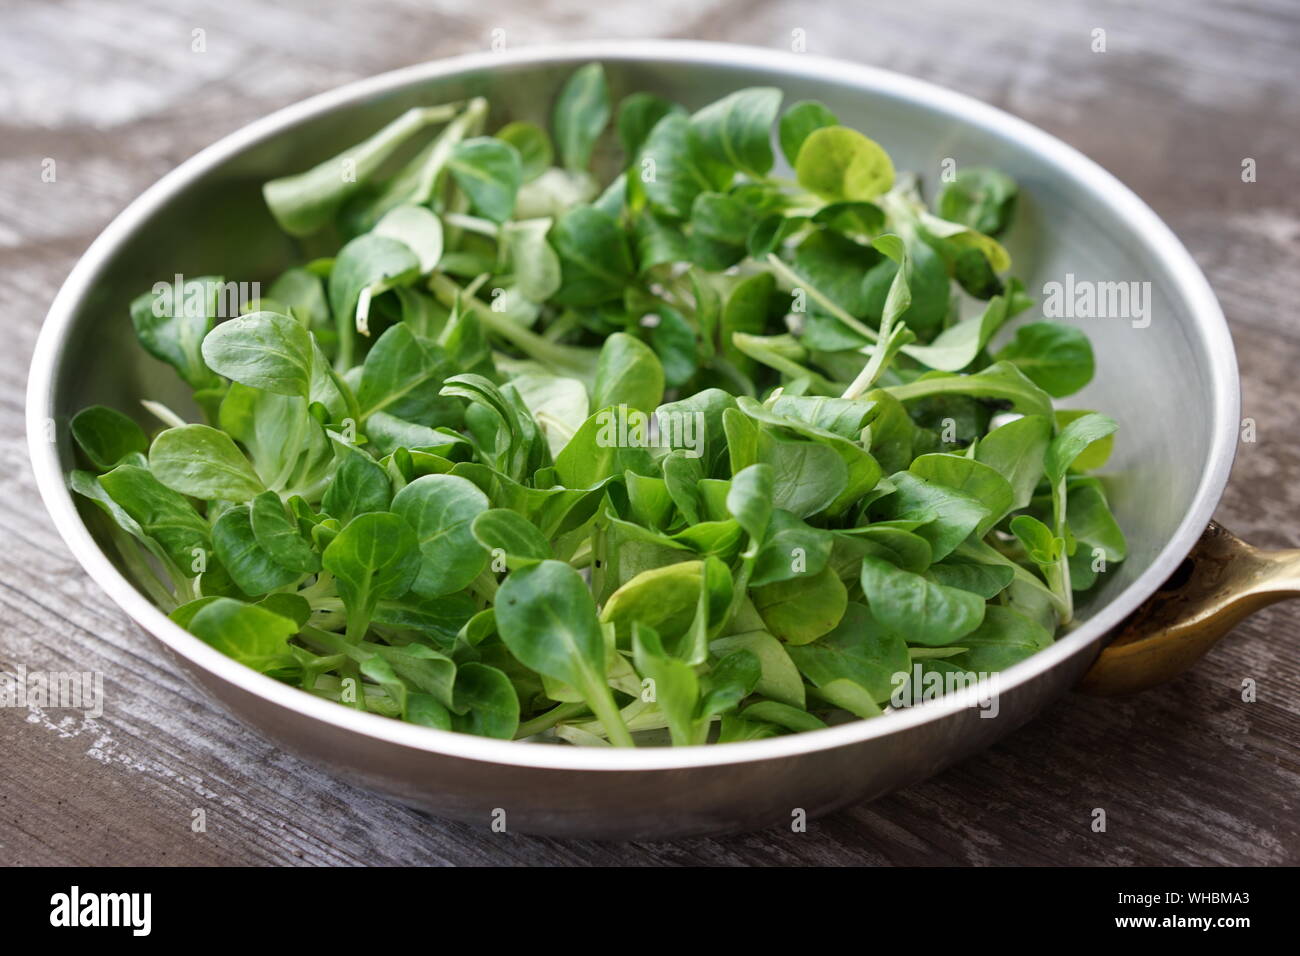 Close-up Of Leaf Vegetable In Container On Table Stock Photo